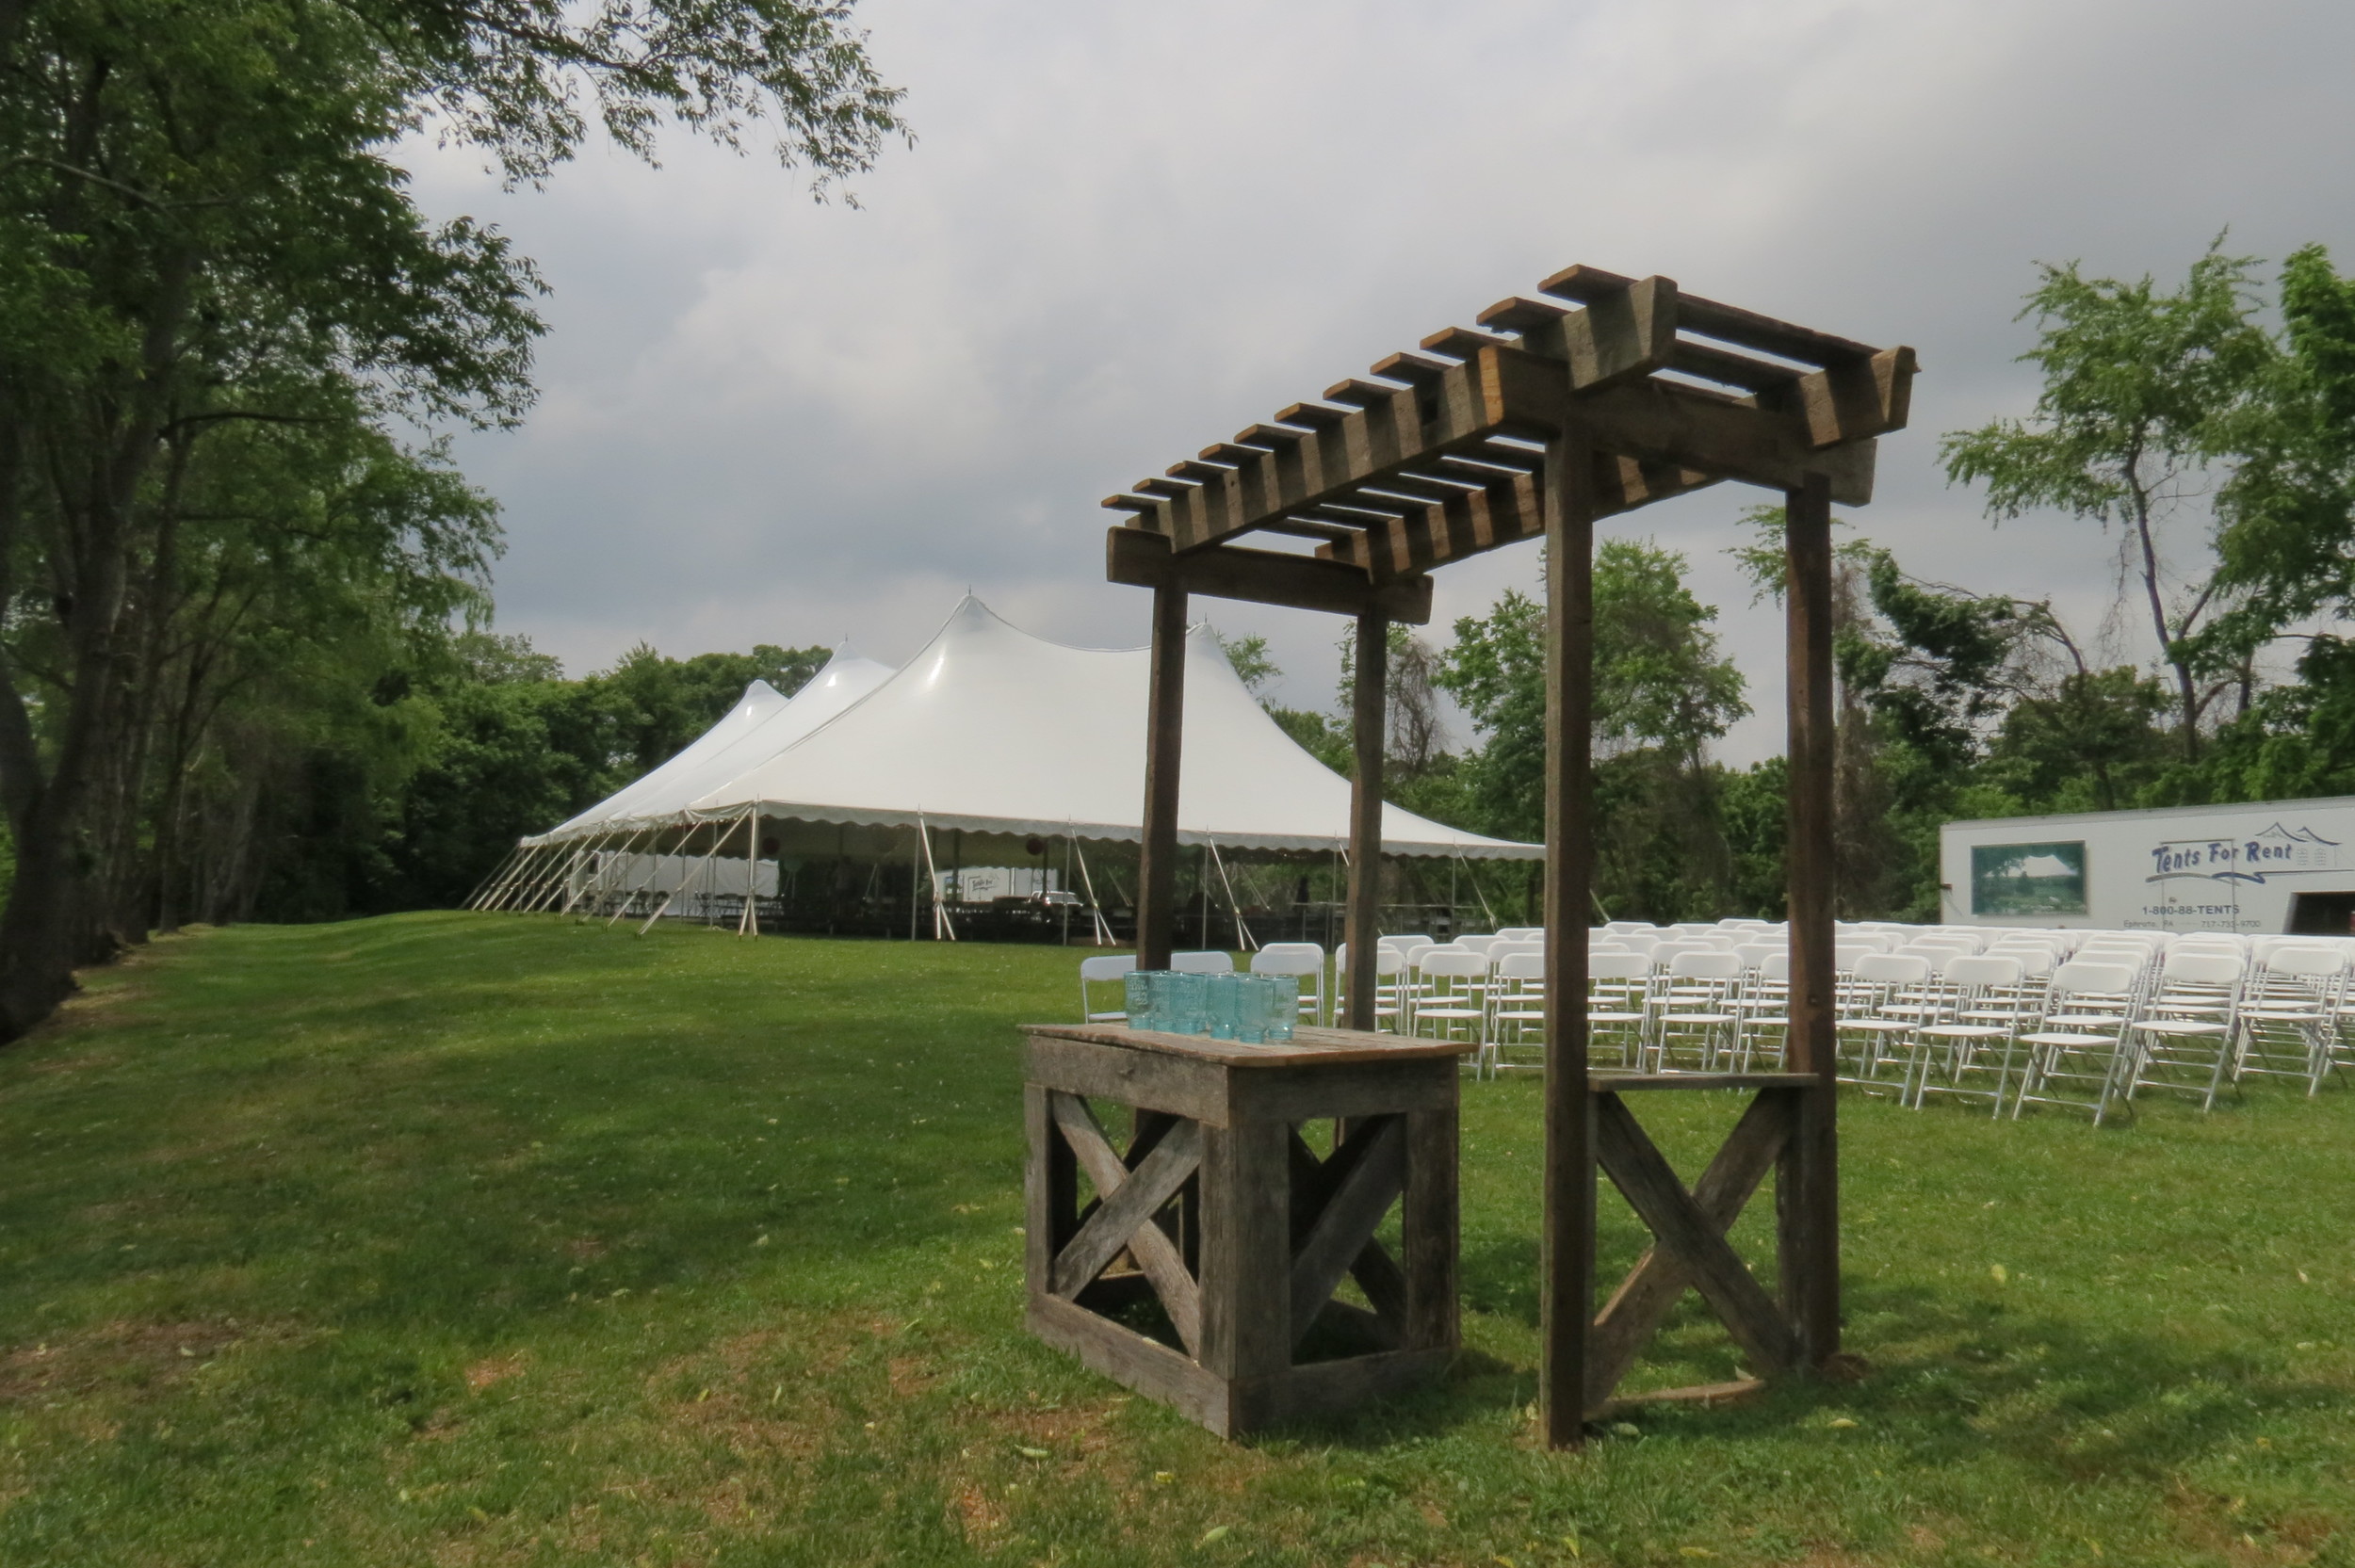 Tent, chair, and other wedding rentals in northern PA